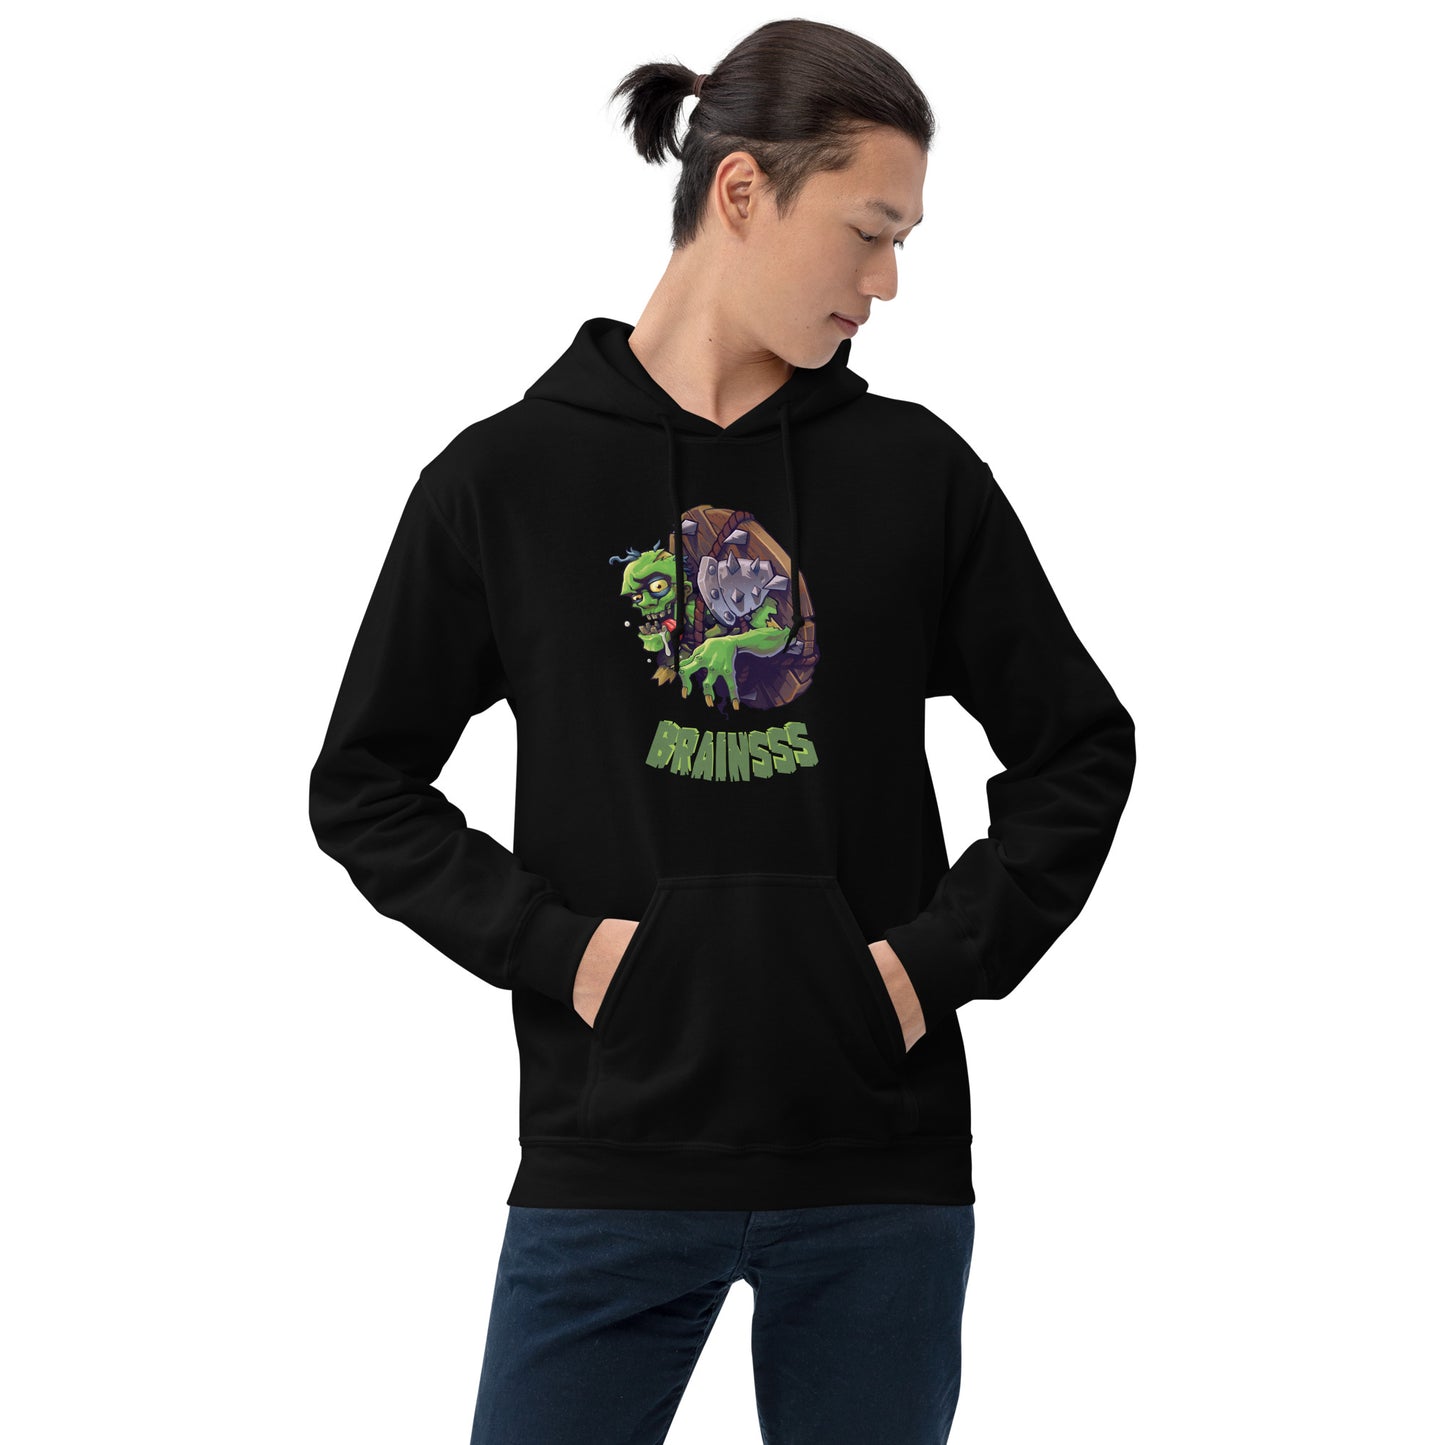 Lawyers & Dragons - Brains Hoodie - Extended Sizes - THREE COLOR OPTIONS!